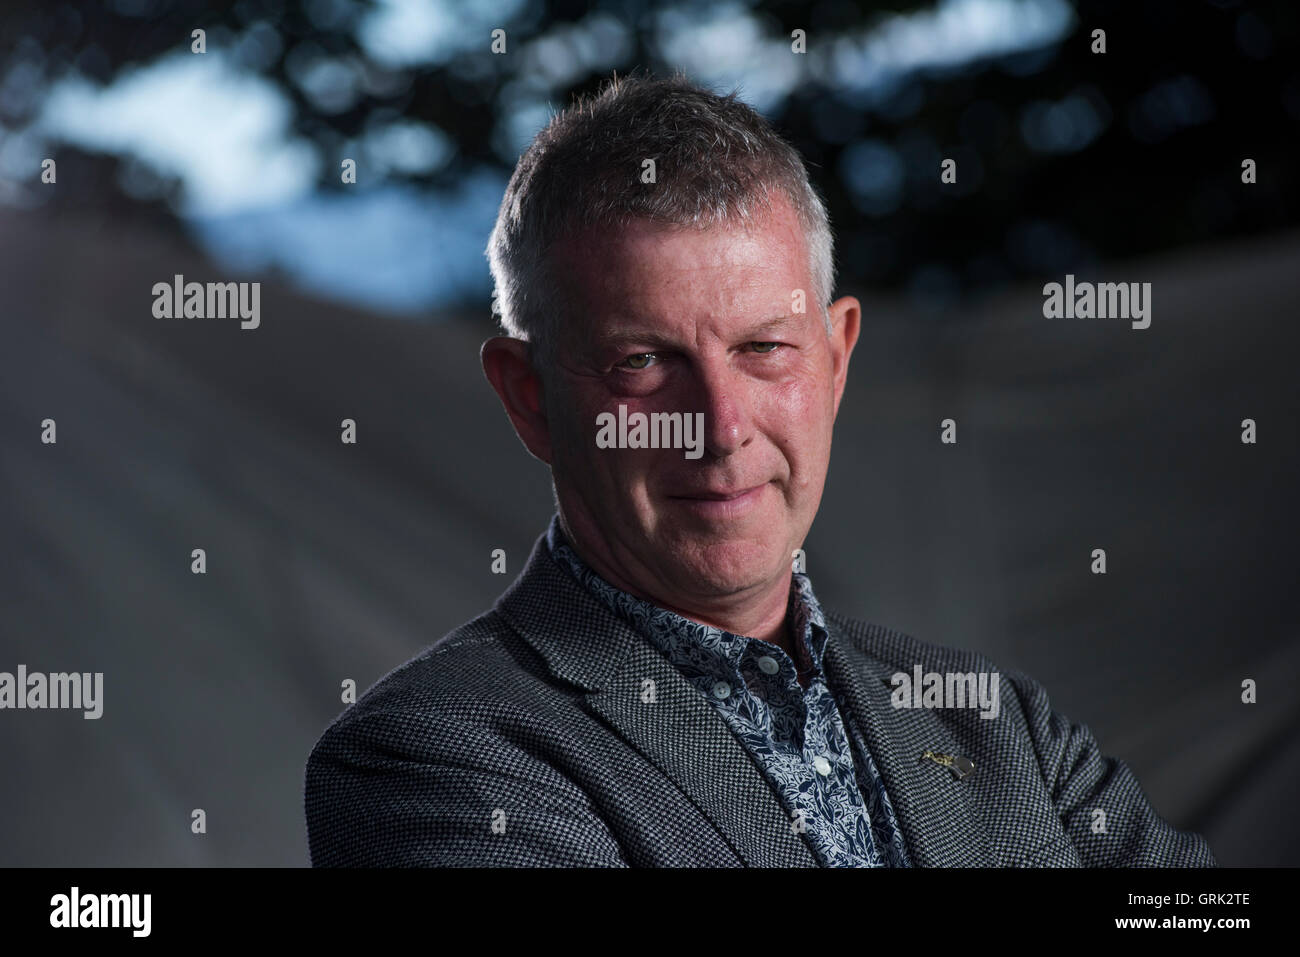 British natural historian, birder, author and television producer Stephen Moss. Stock Photo